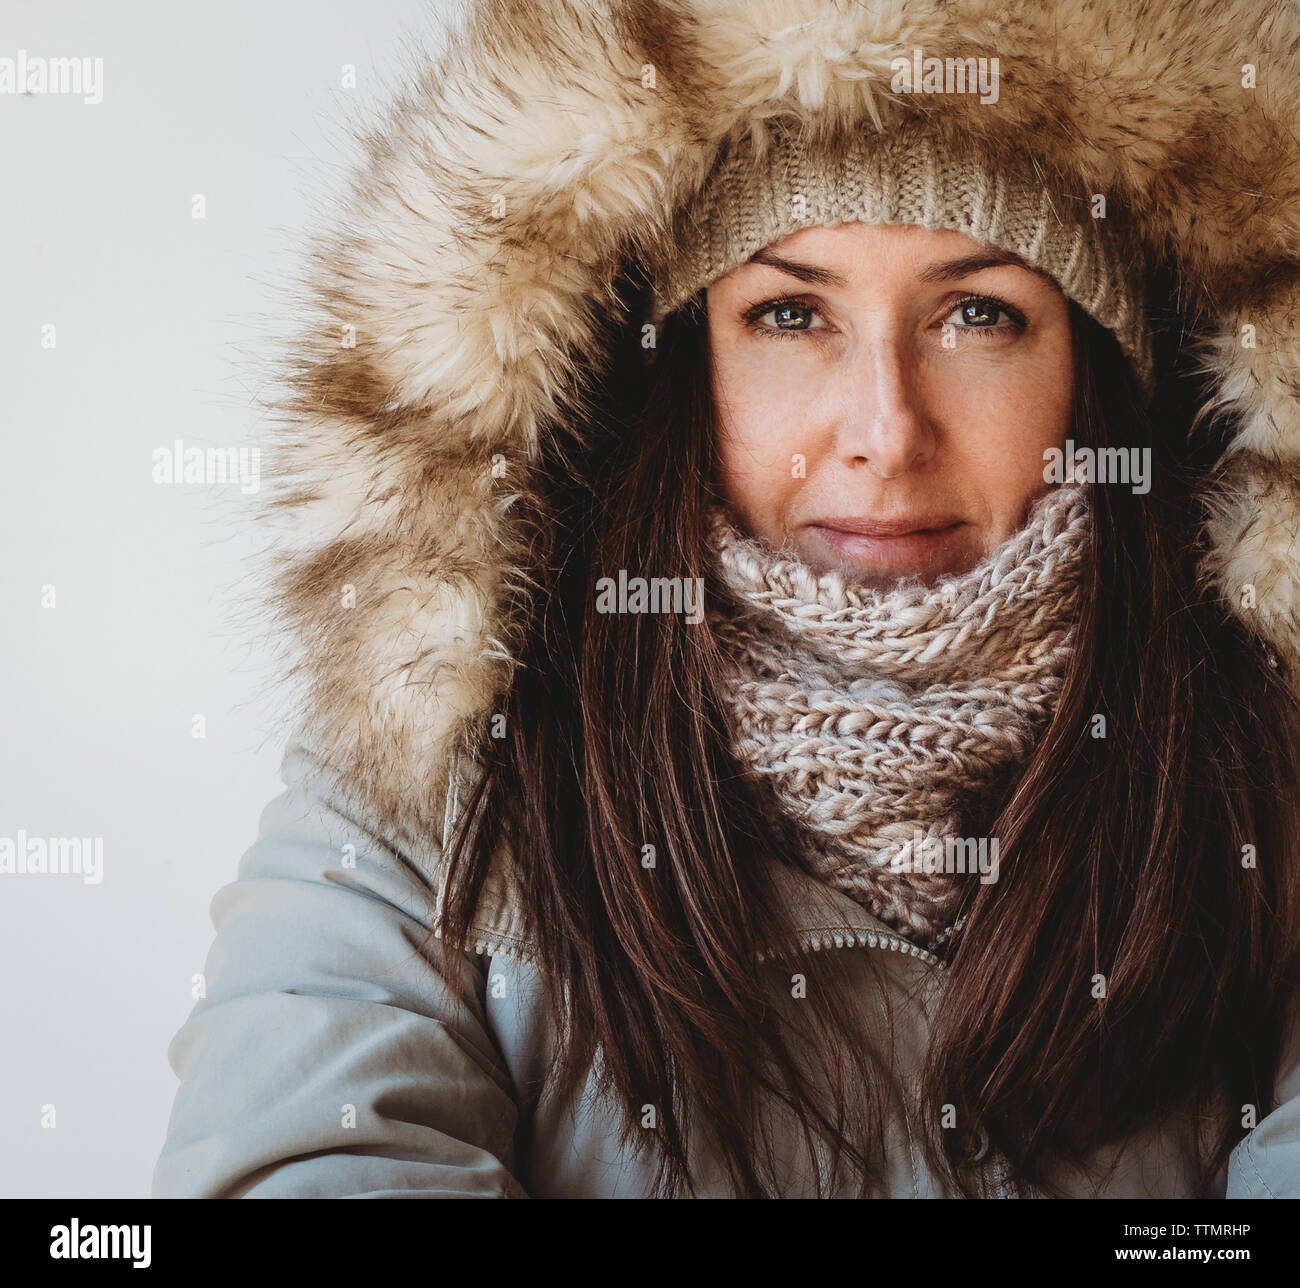 Close up of woman wearing winter clothing against white background. Stock Photo